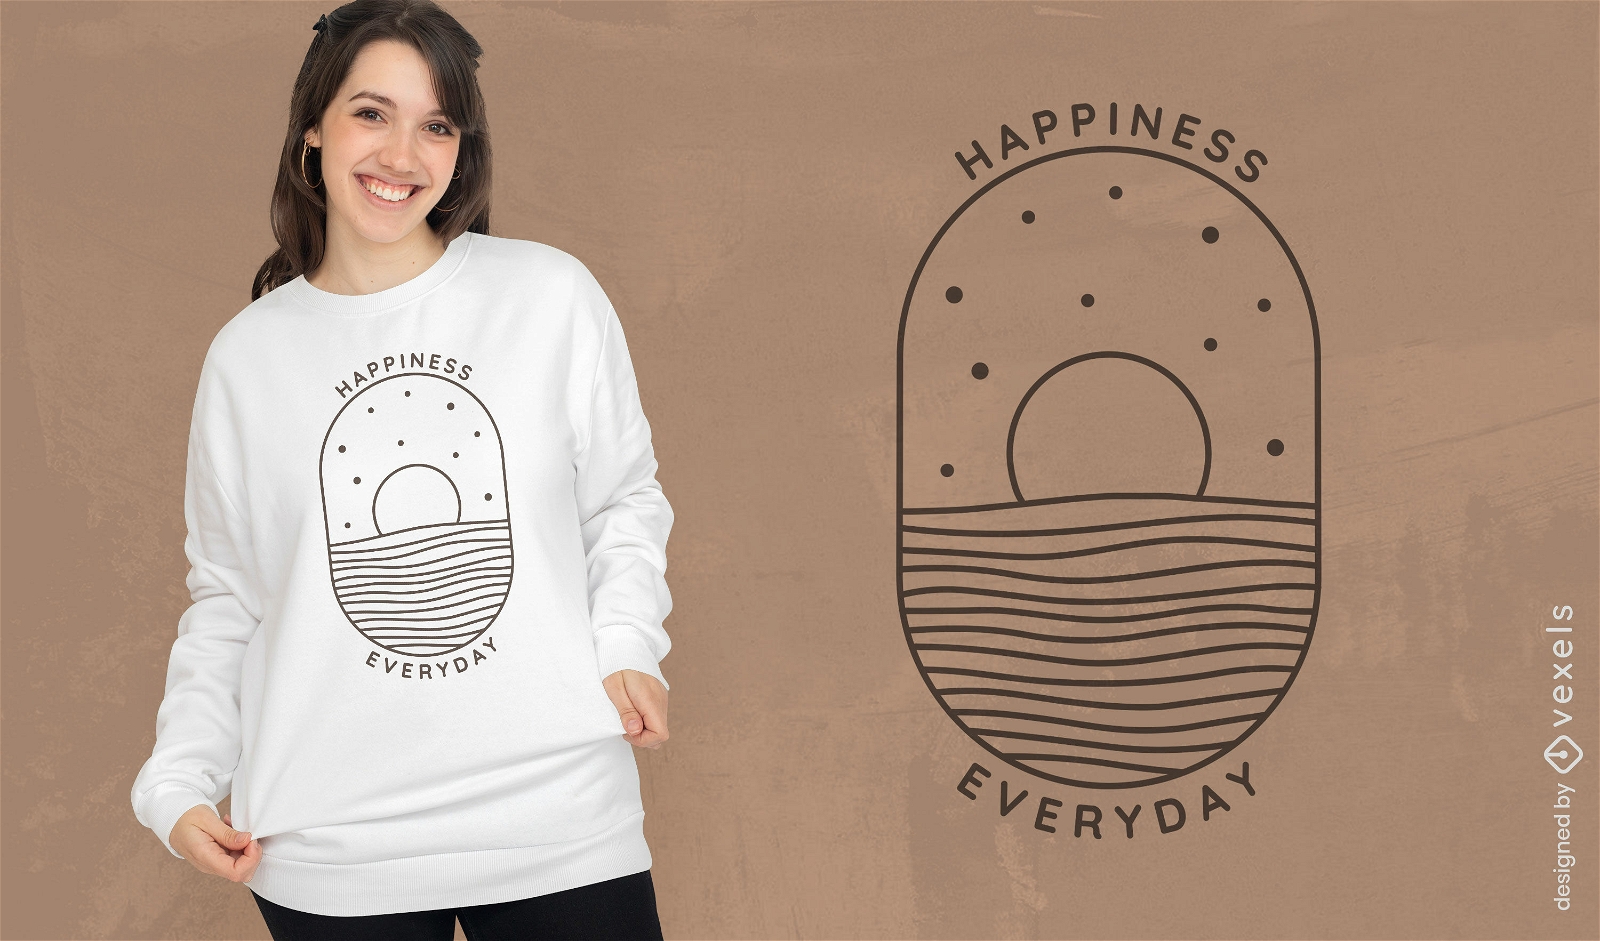 Happiness everyday t-shirt design